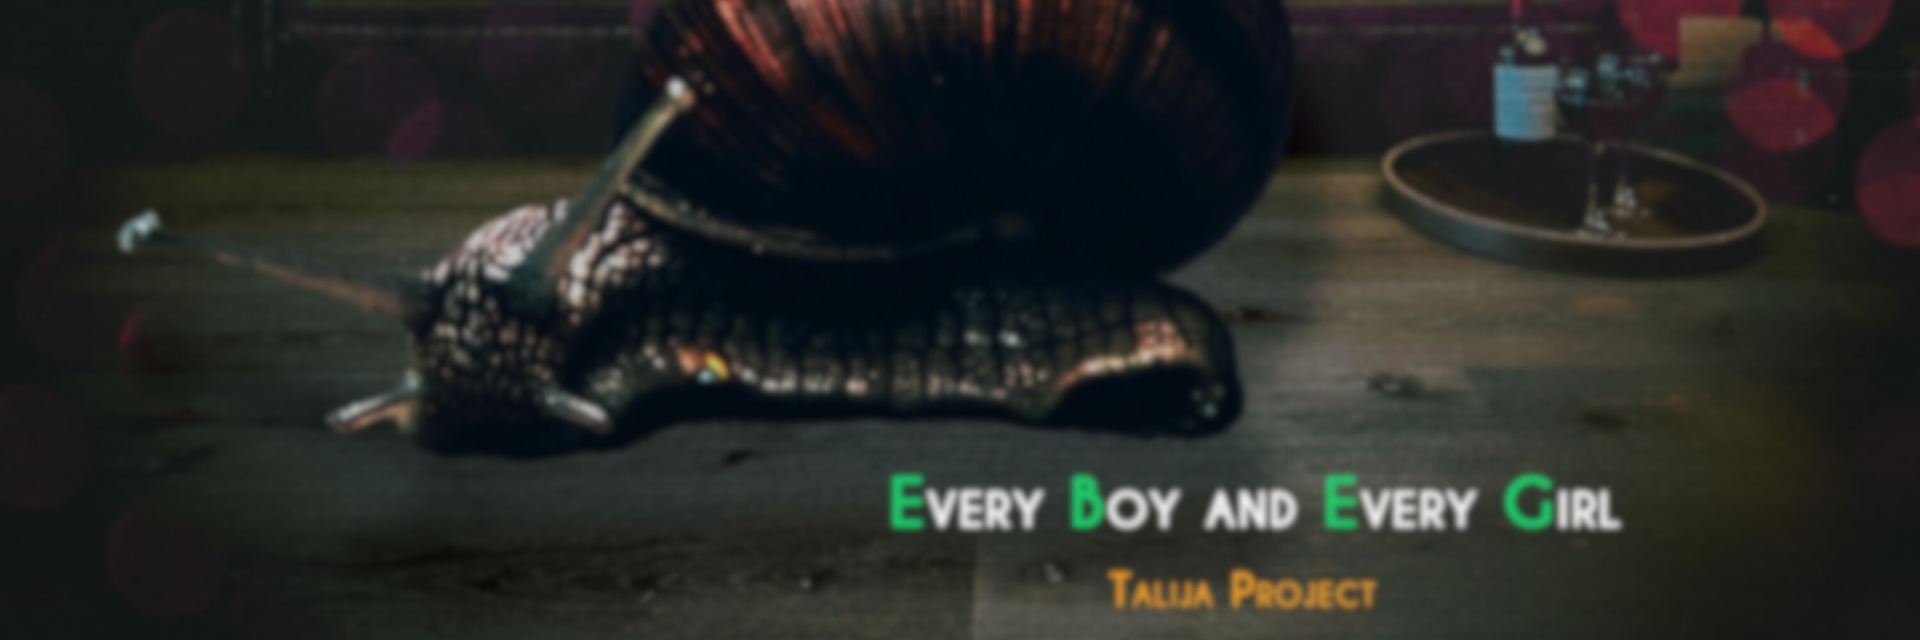 Every Boy and Every Girl | Talija Project